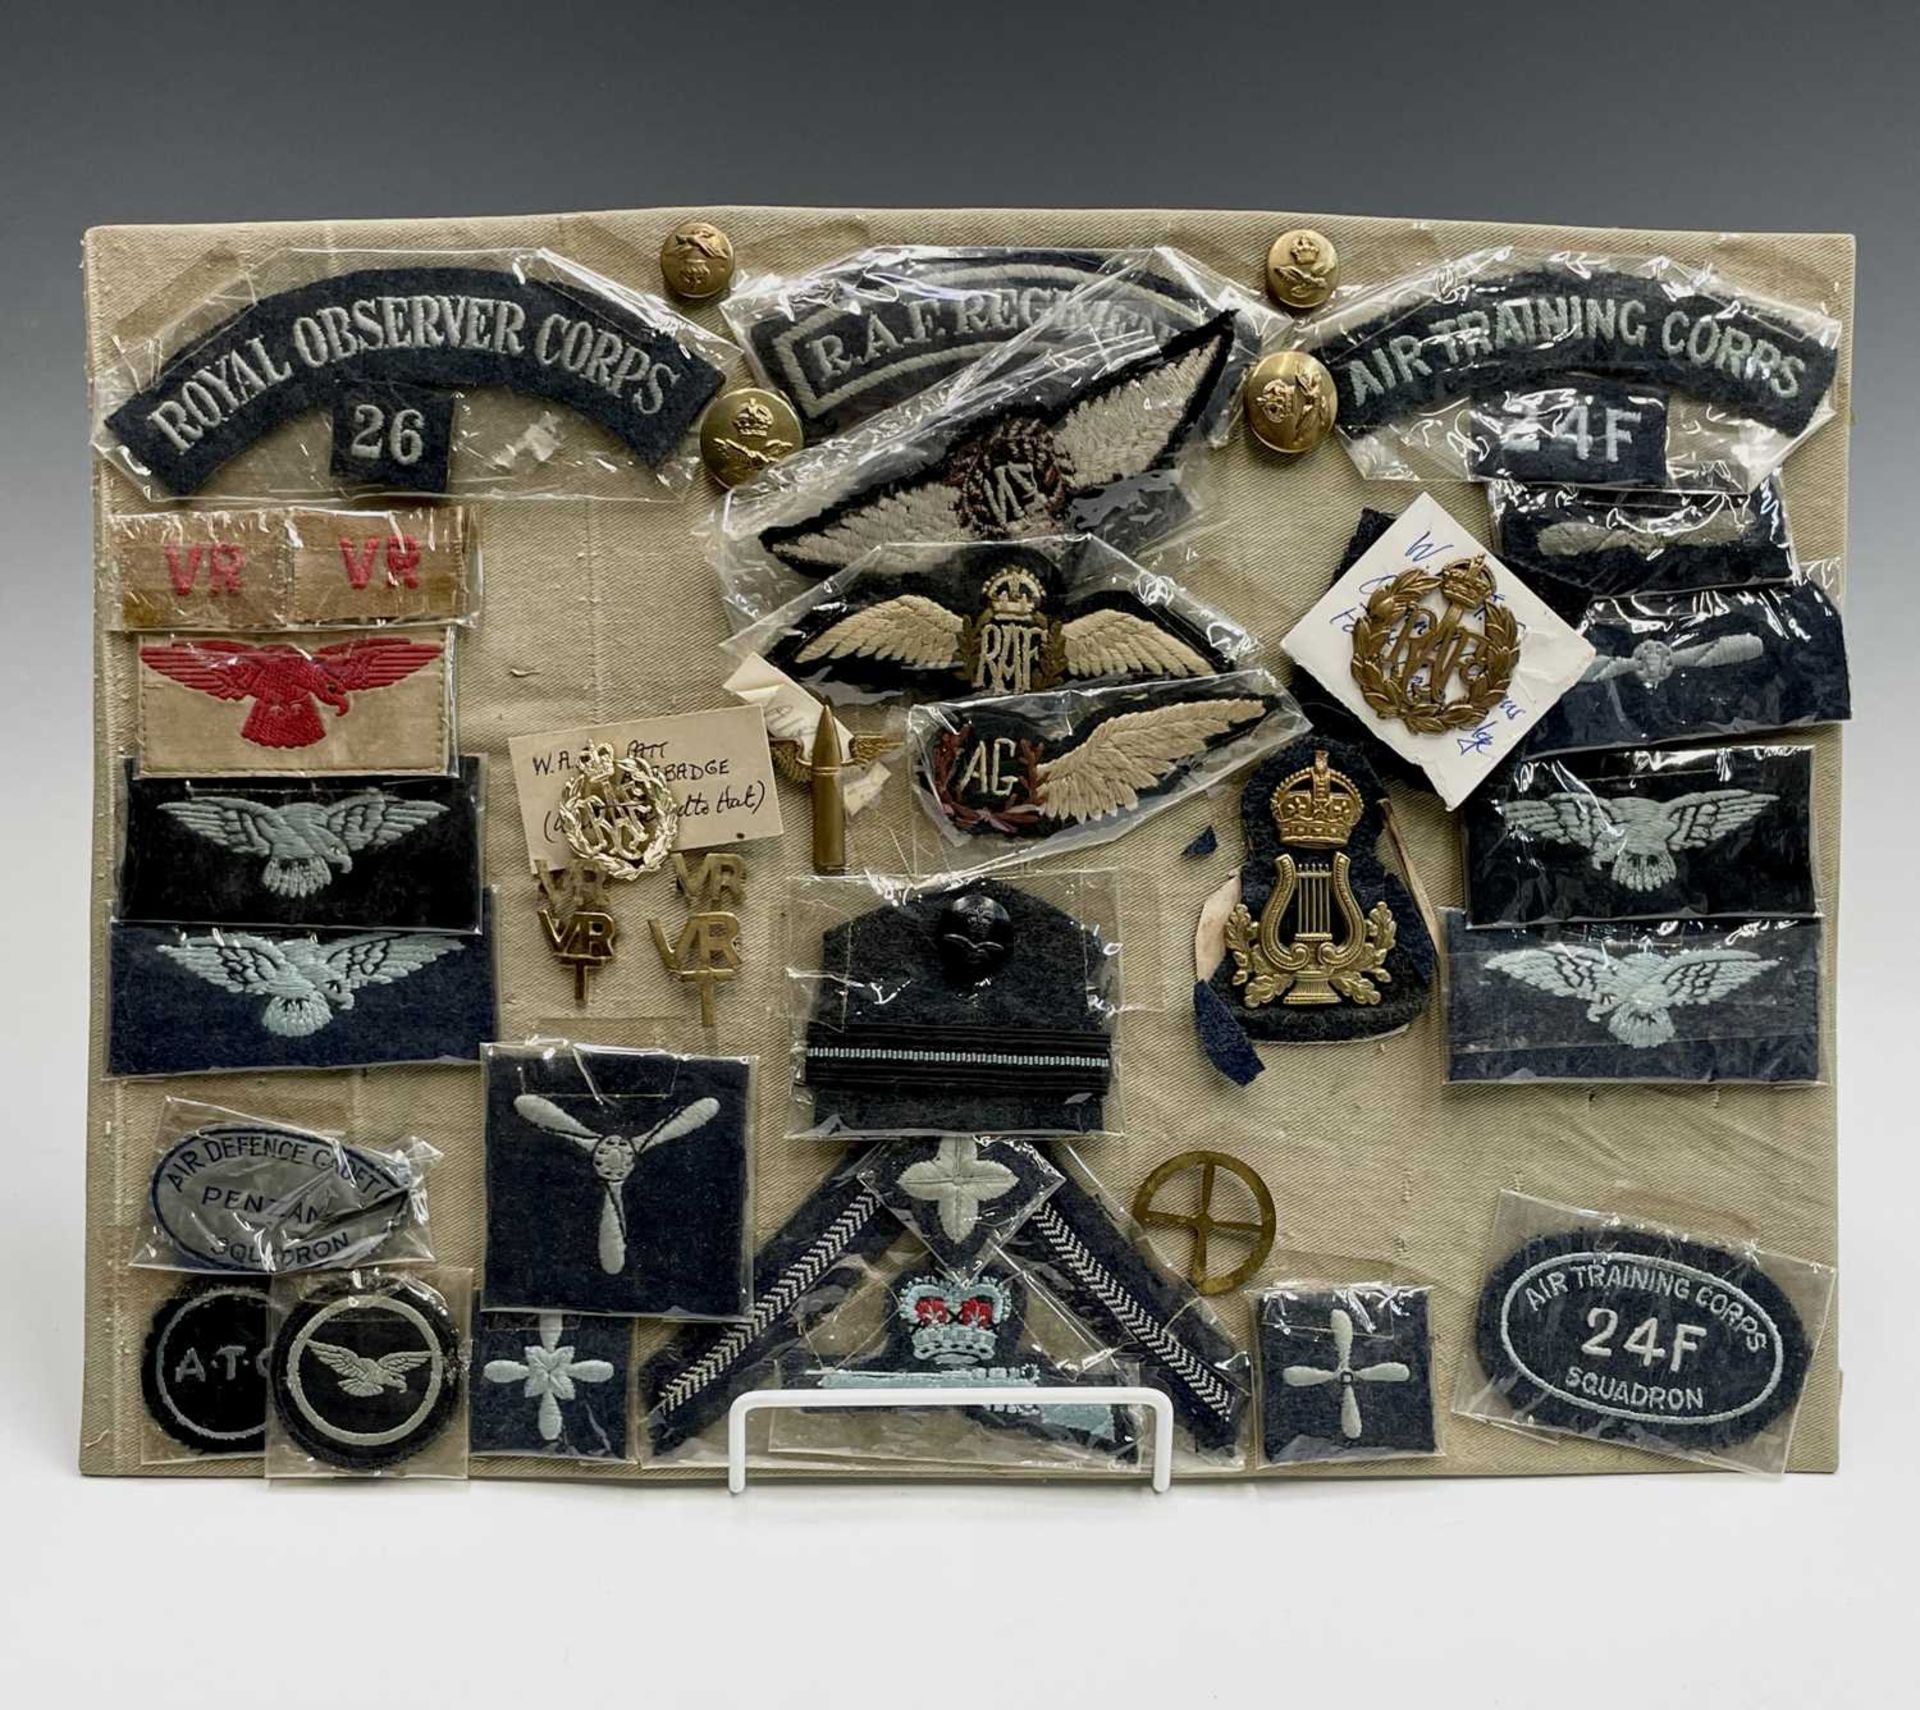 Royal Air Force / Royal Observer Corps / A.T.C etc - 1. A display card containing various cloth